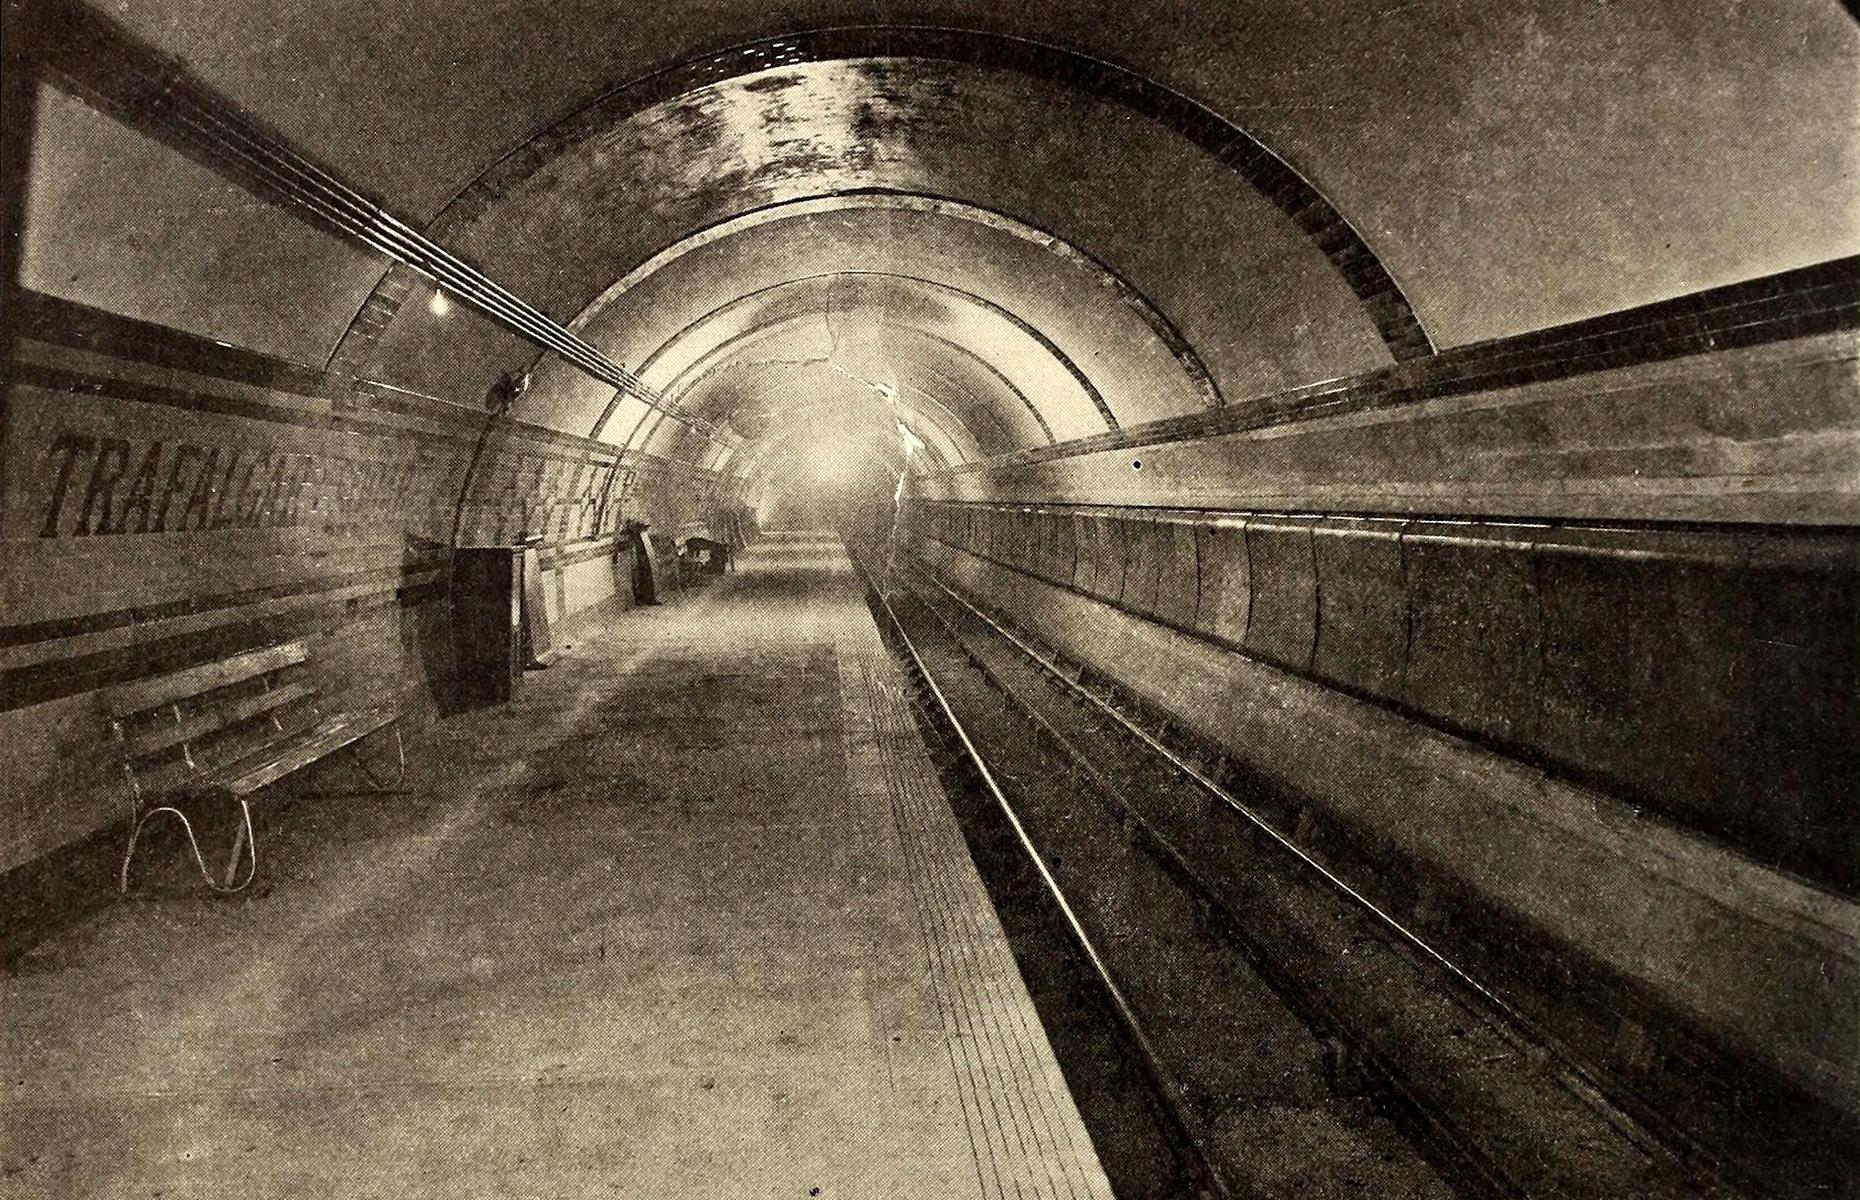 Meanwhile, London's underground rail network was going from strength to strength and daily passenger numbers were rising. Innovations continued throughout the 1880s, including the opening of the very first tube tunnel (from the Tower of London to Bermondsey) and the completion of the Circle Line. This hazy shot from 1884 shows an unusually empty Trafalgar Square station, with a design not too dissimilar to today's.